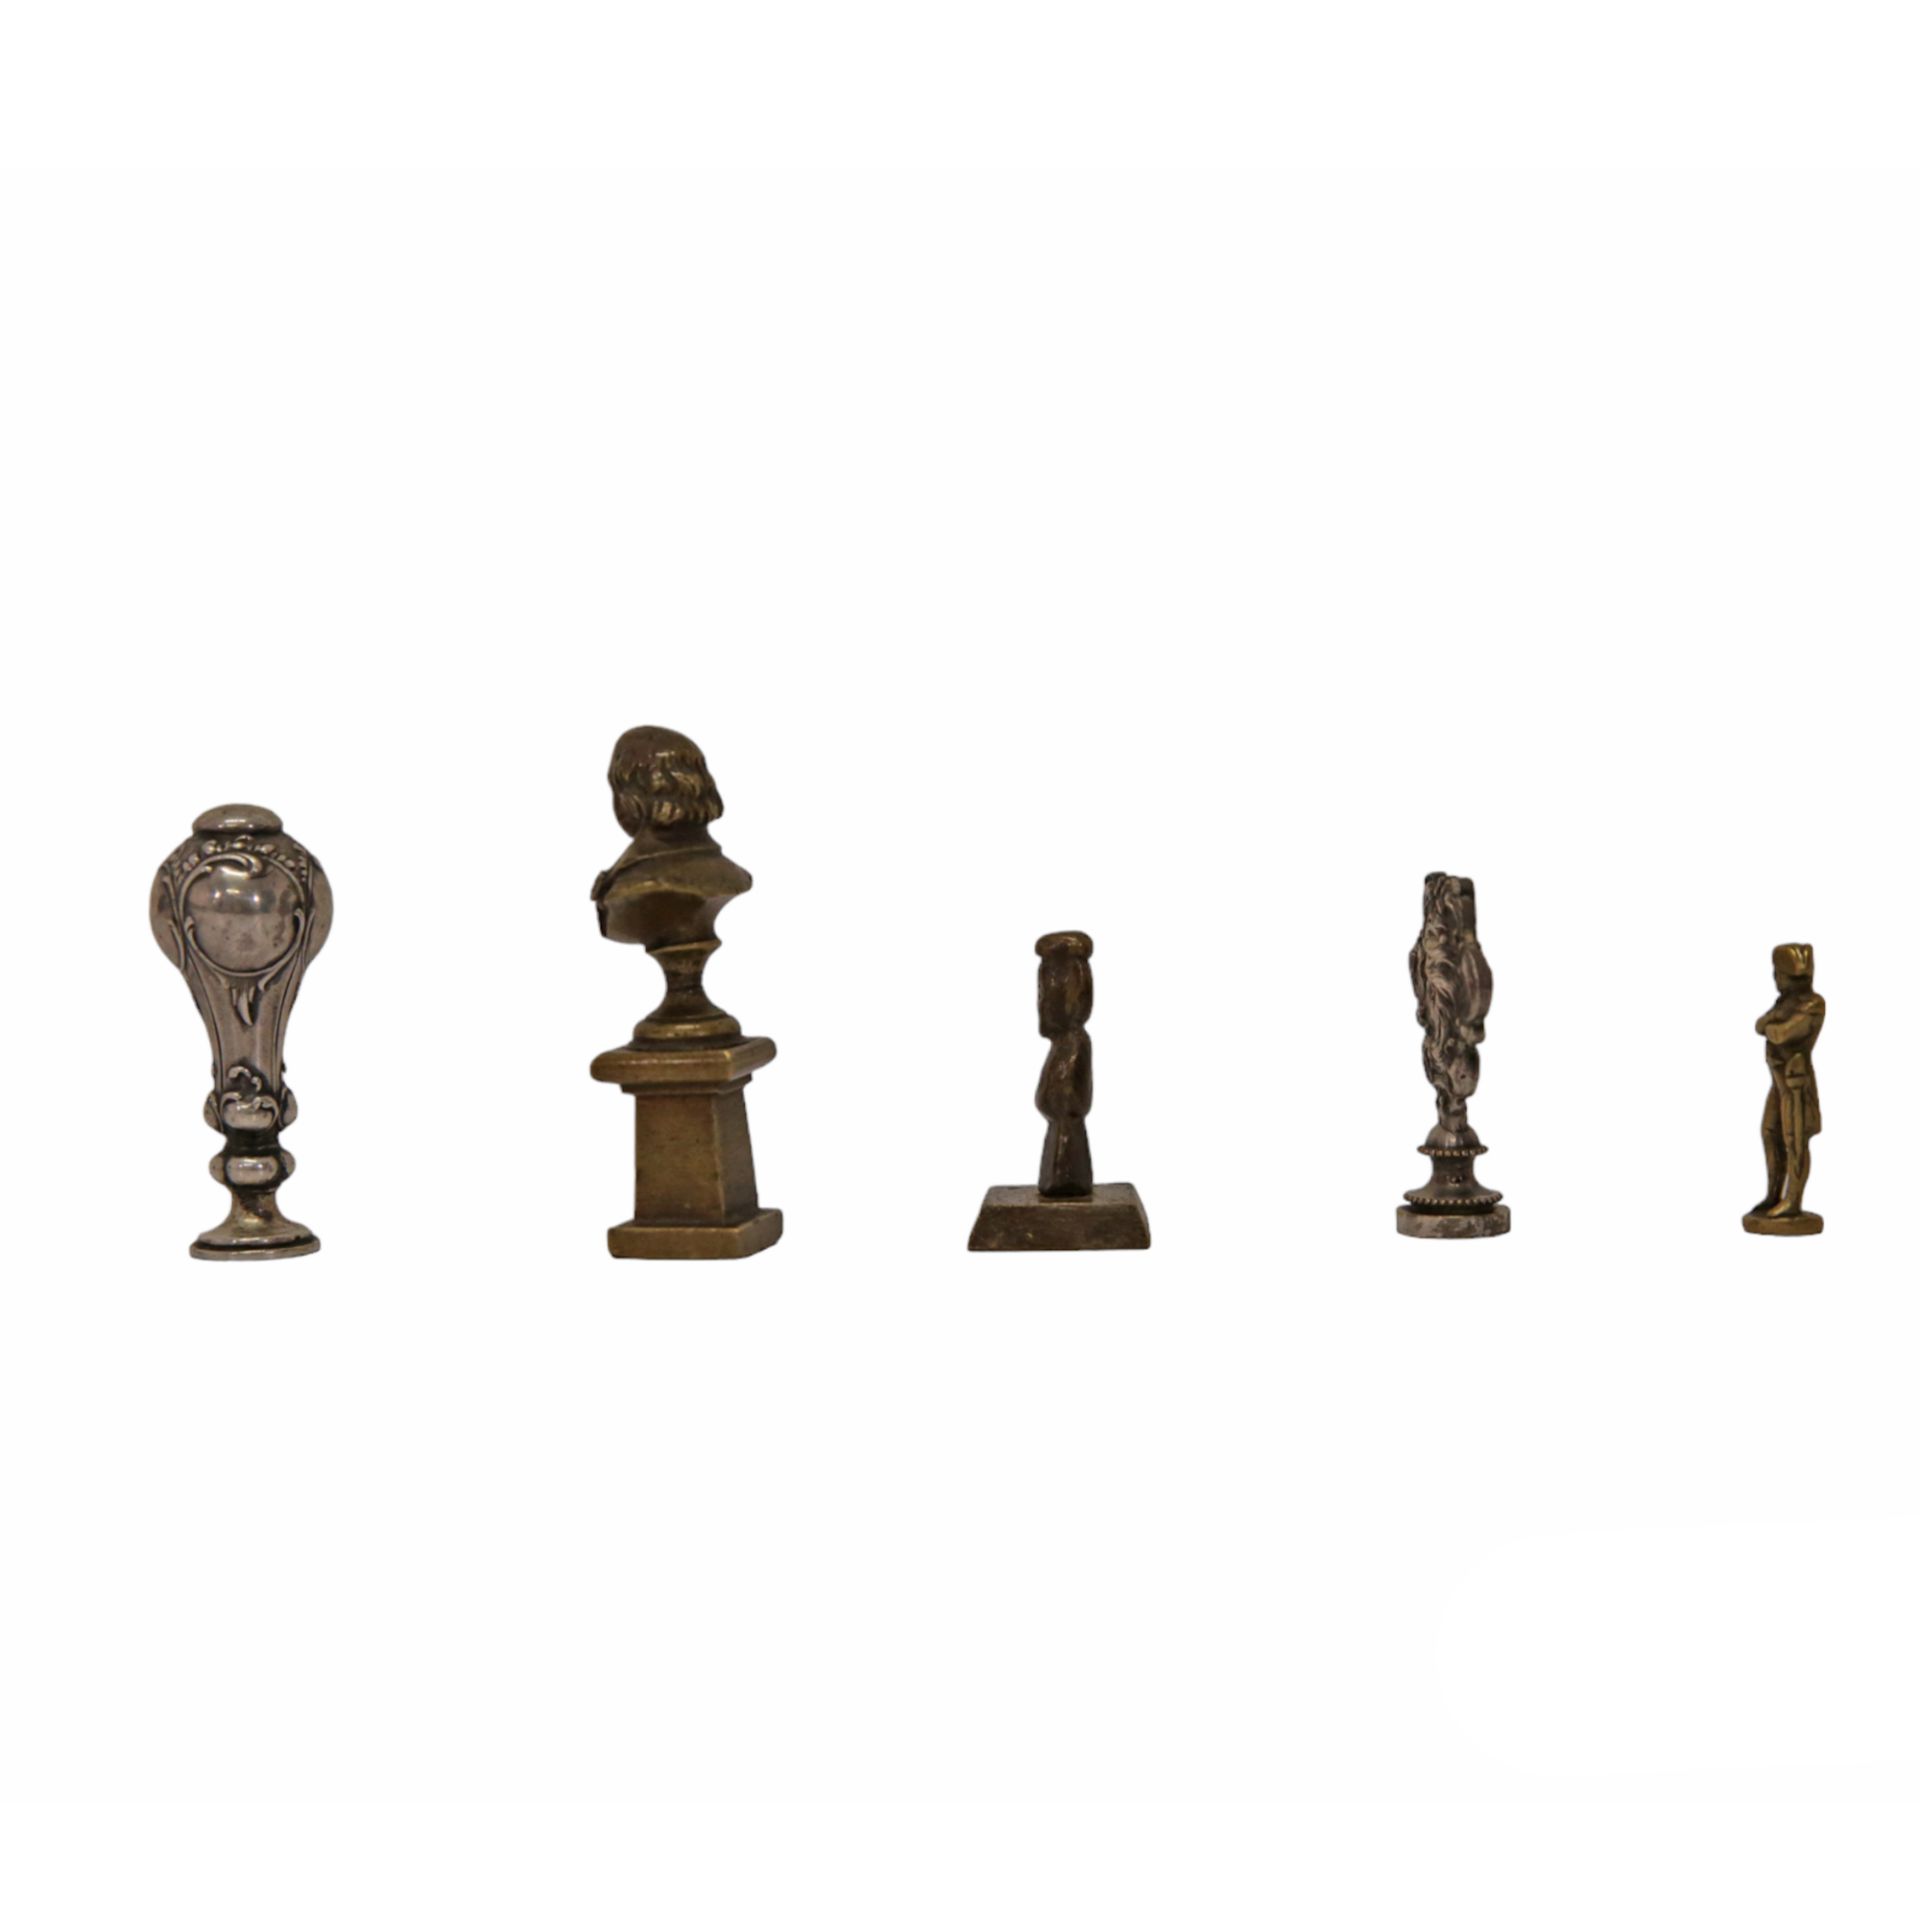 Lot of five bronze and silver-plated figurines of the 19th-20th century, Napoleon figure and others. - Image 2 of 5